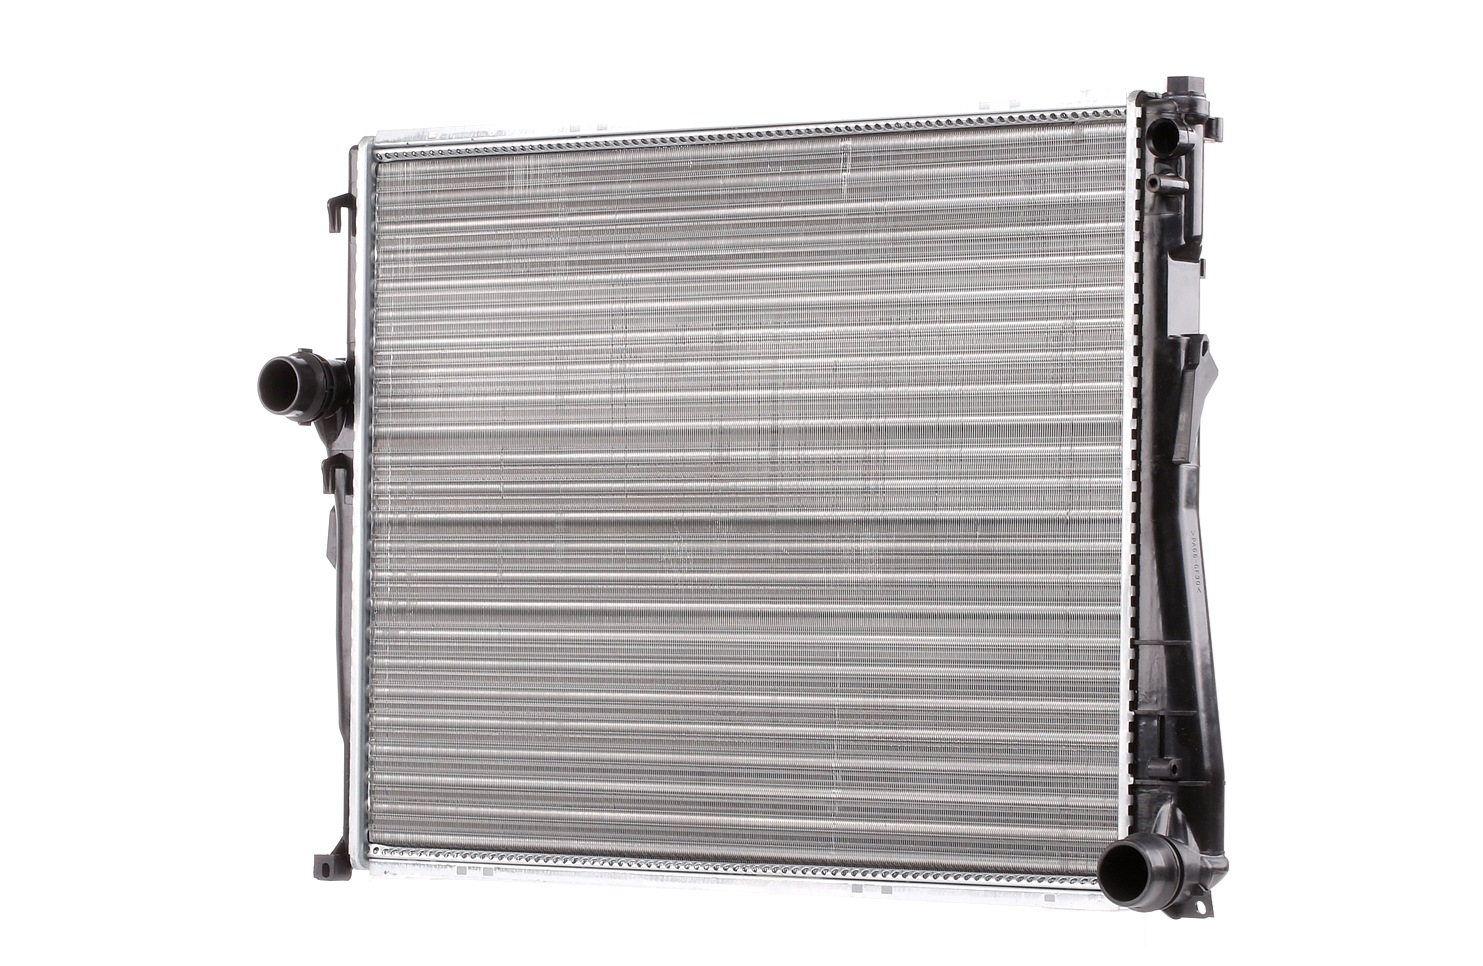 RIDEX 470R0006 Engine radiator Aluminium, 580 x 445 x 24 mm, with accessories, without sensor, Manual-/optional automatic transmission, Brazed cooling fins